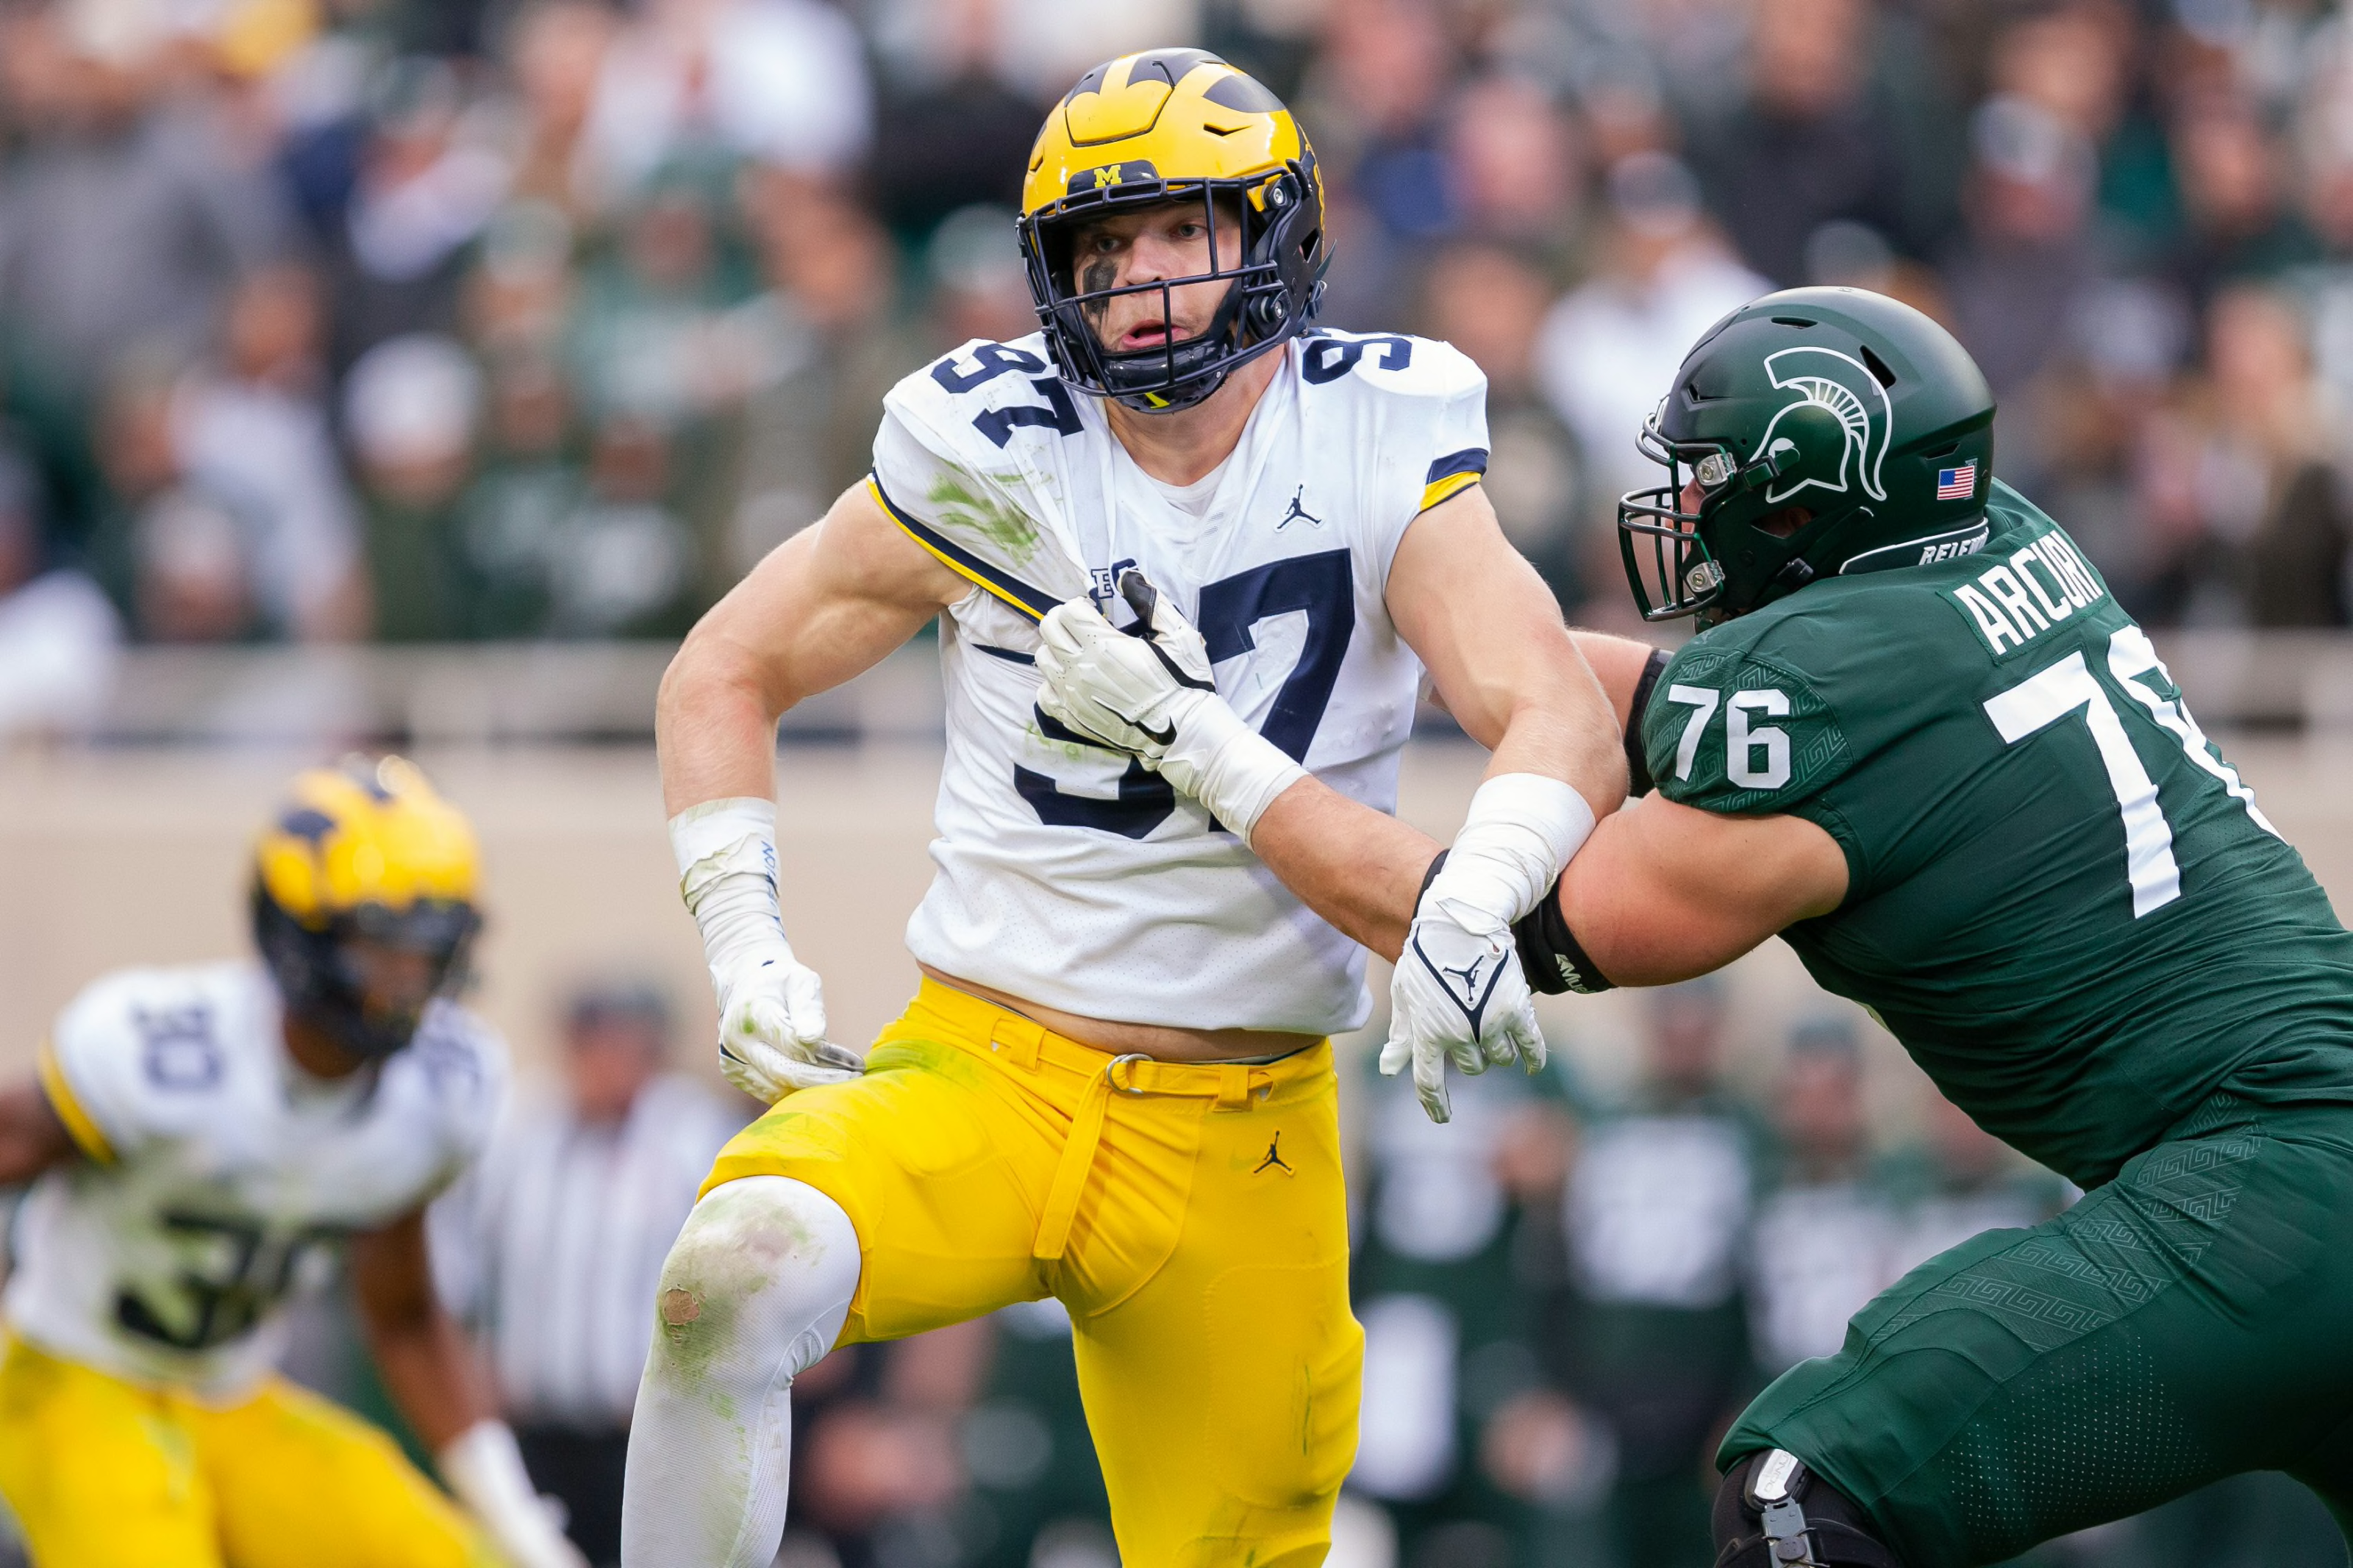 2022 NFL Mock Draft: Trenches dominate the first round